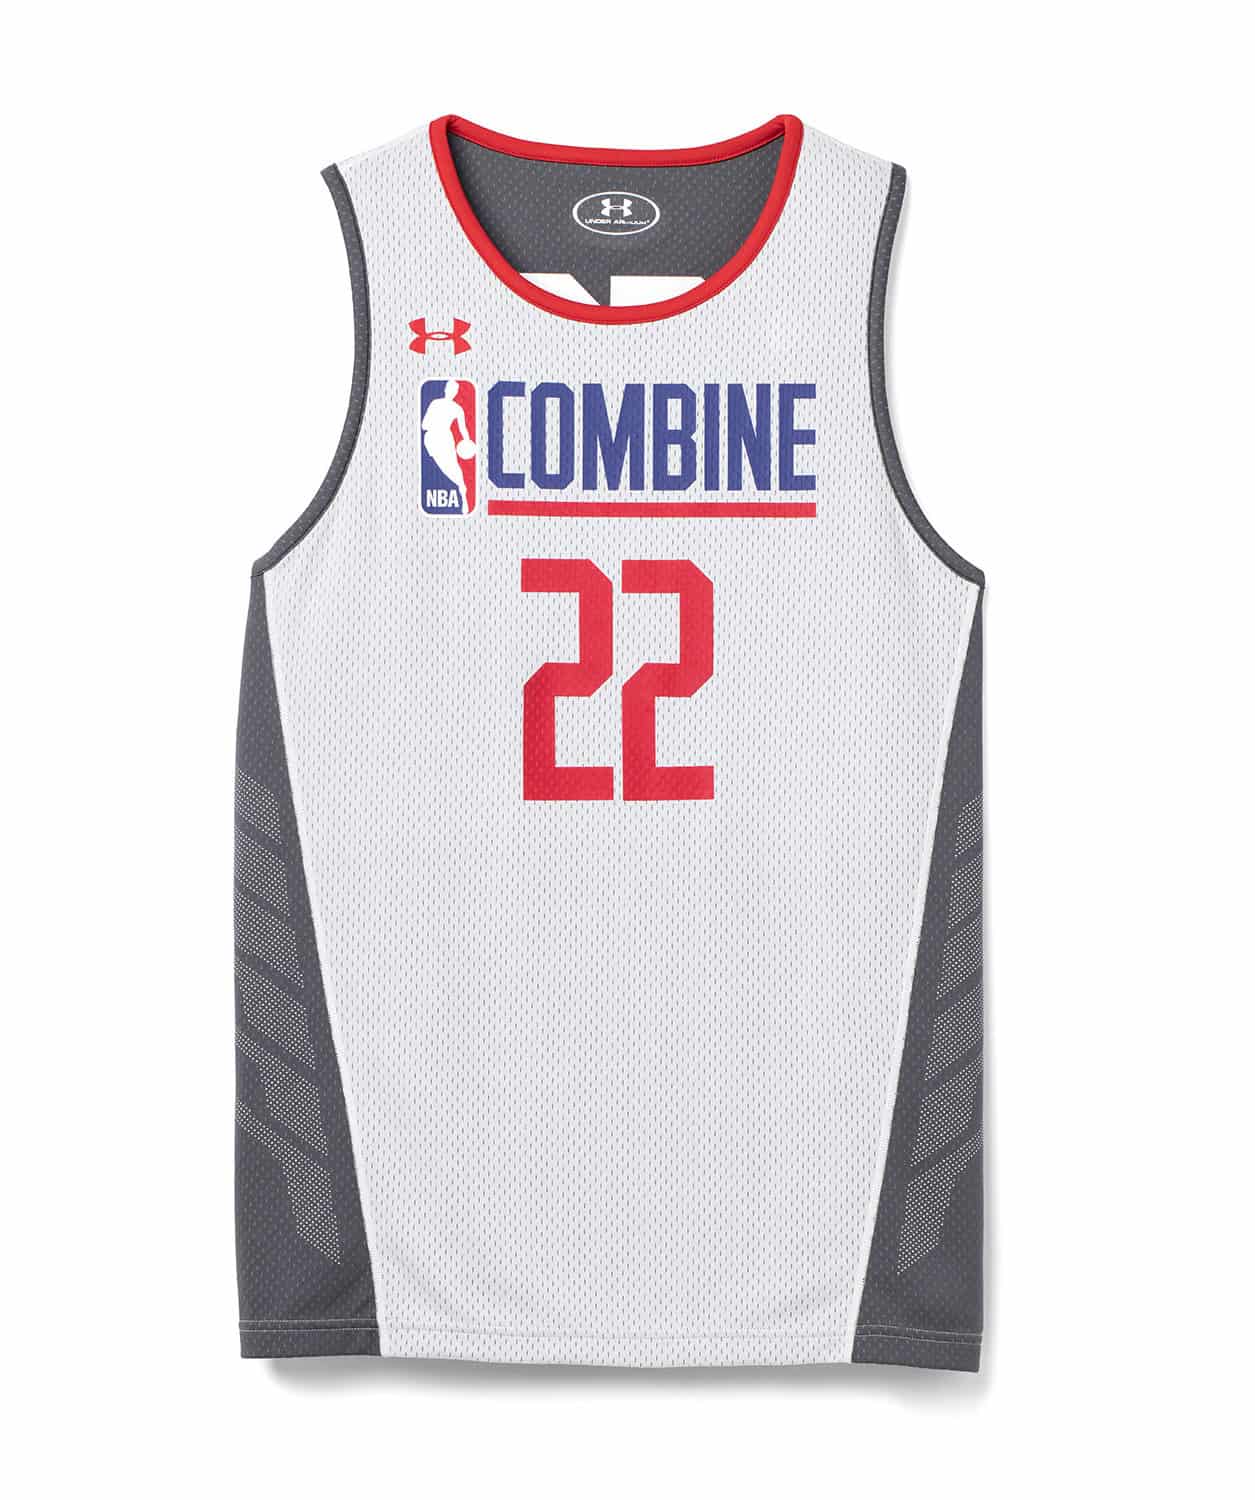 White mens NBA Combine draft jersey by Under Armour